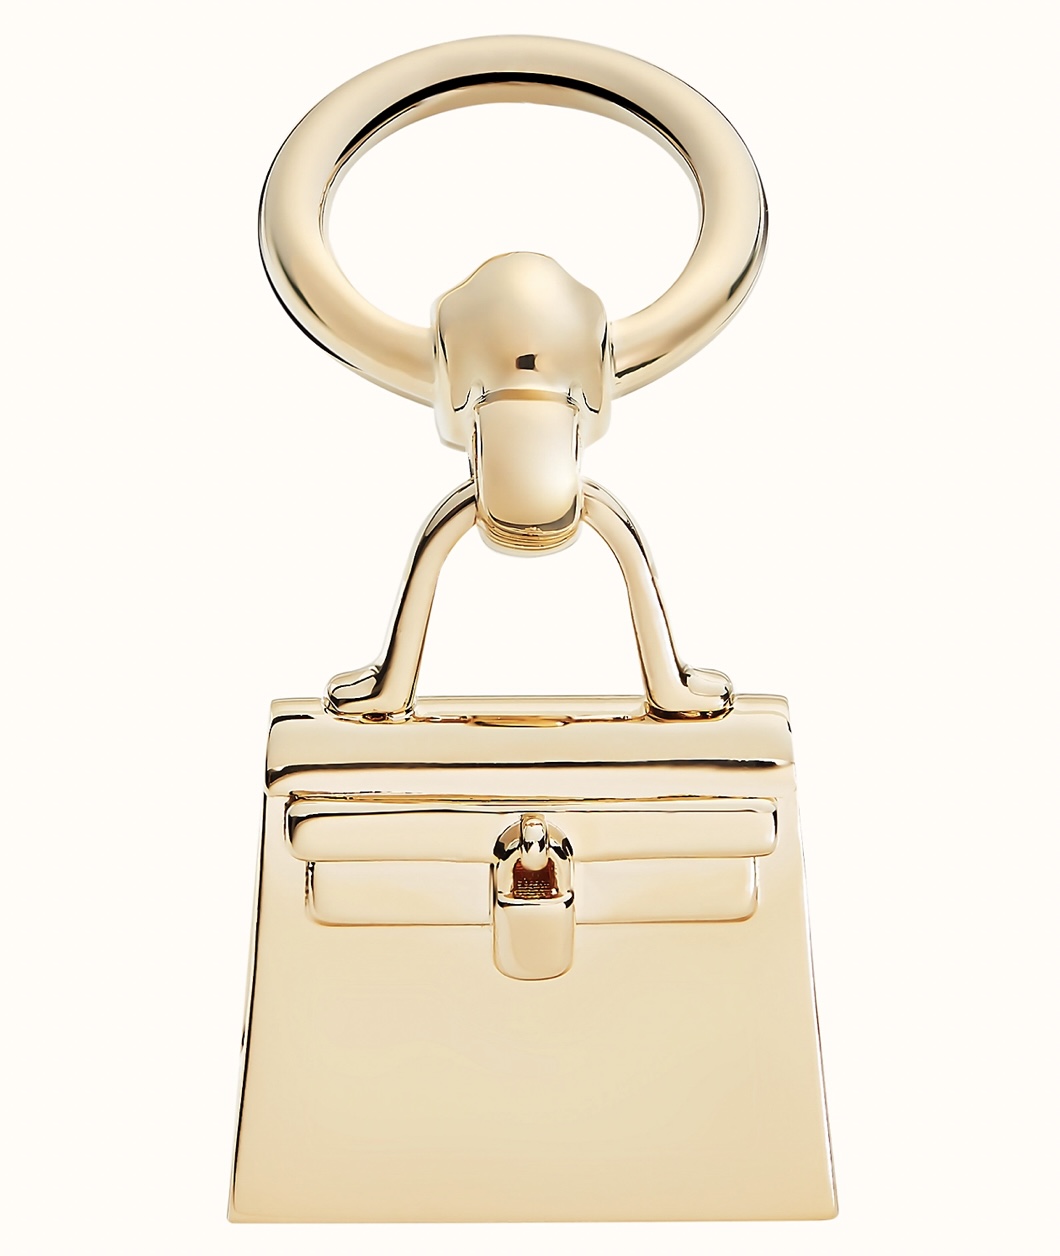 Hermes Gold colour goes with any Hermes twilly - Happy High Life